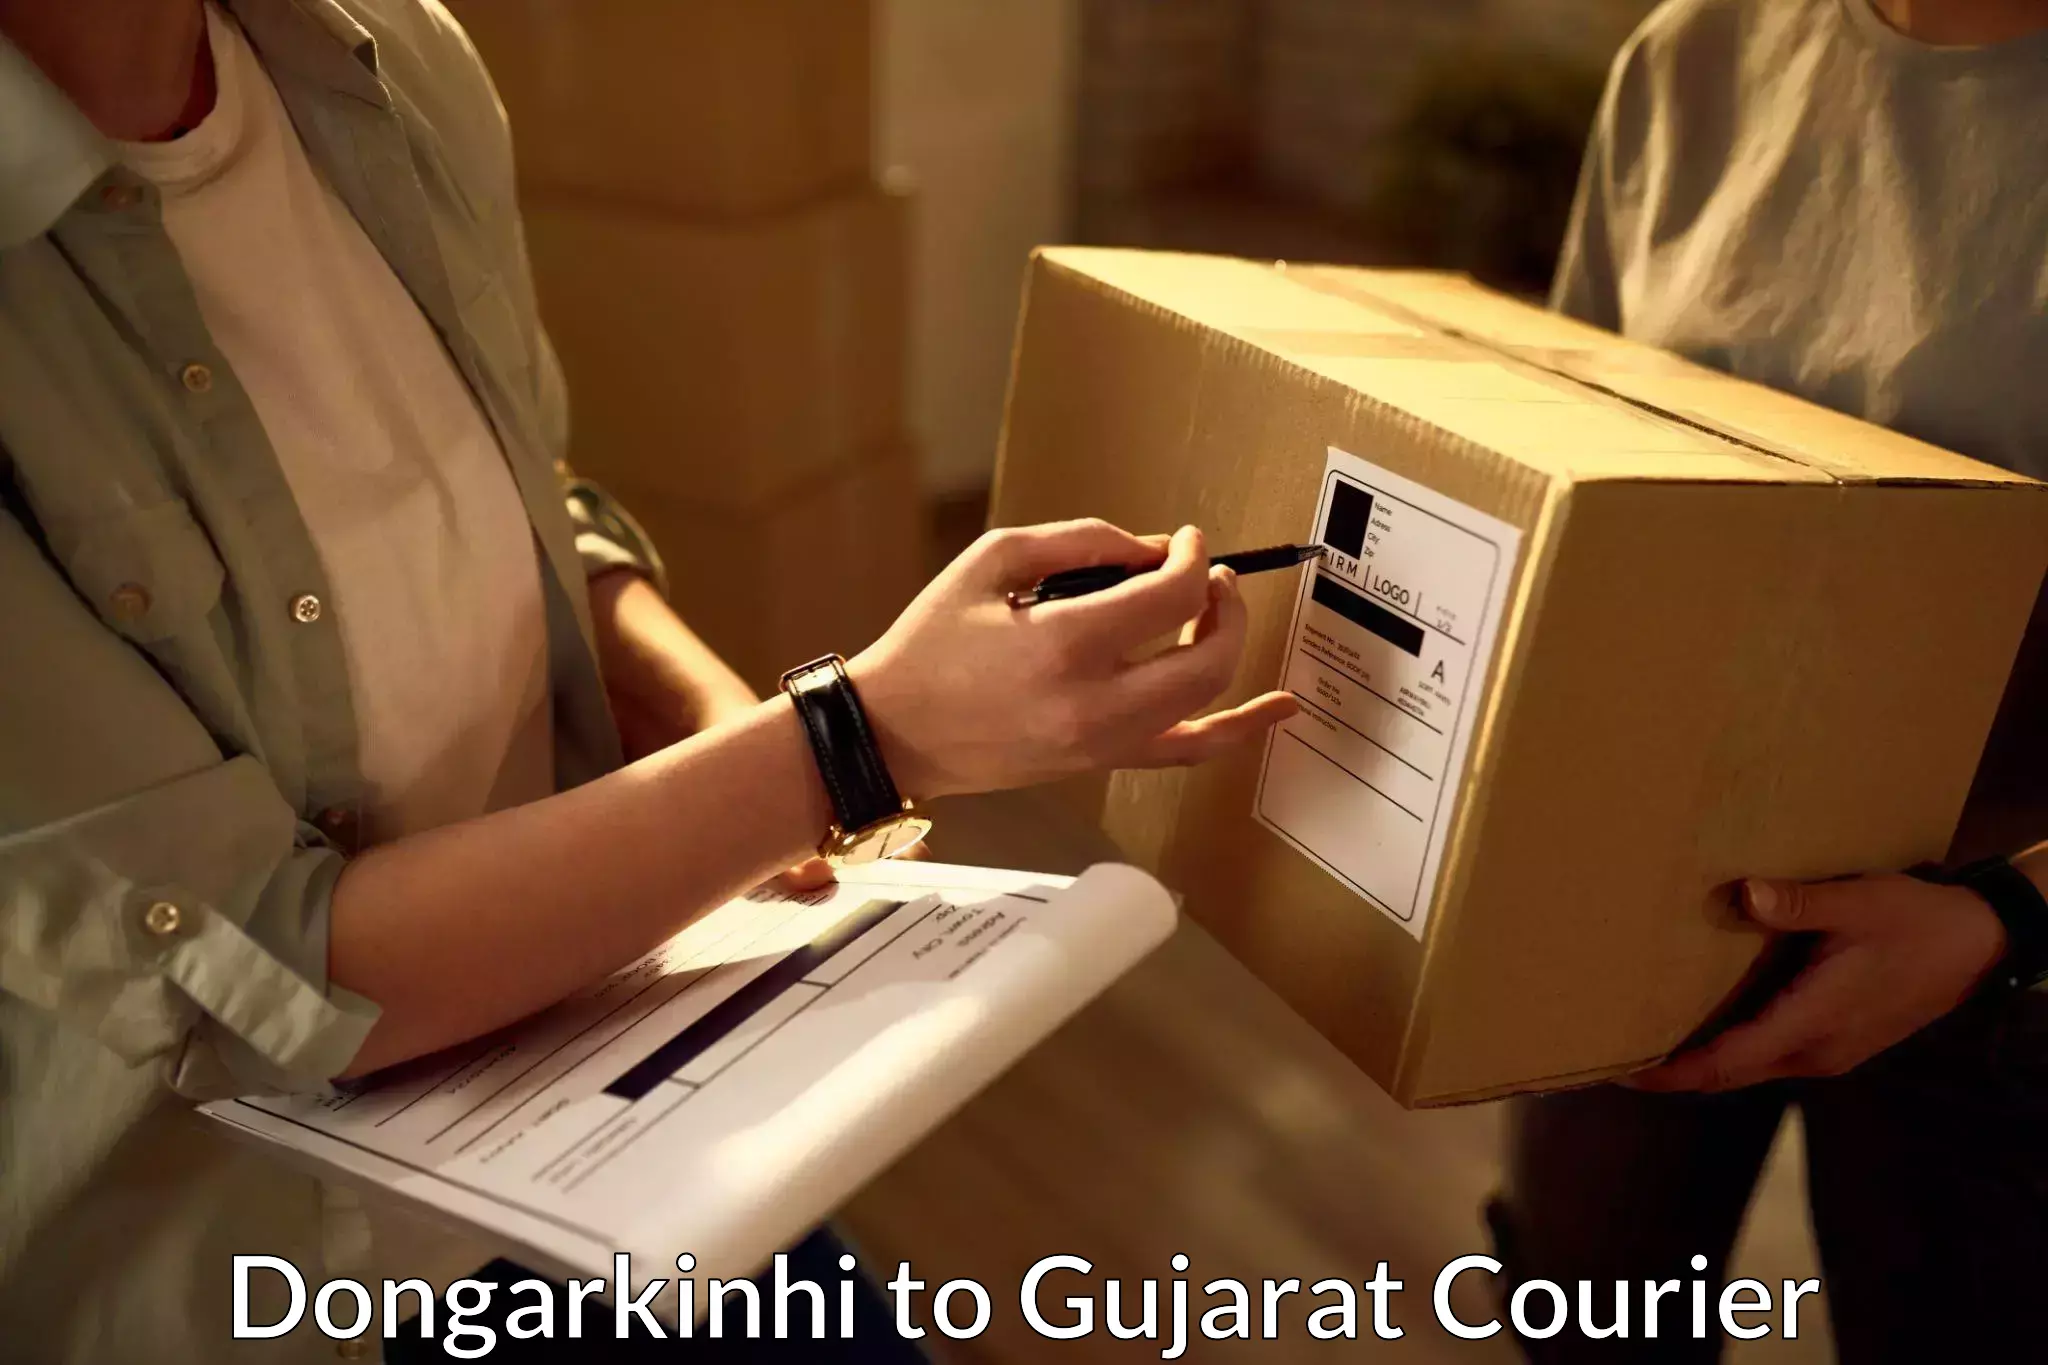 Nationwide courier service Dongarkinhi to Botad